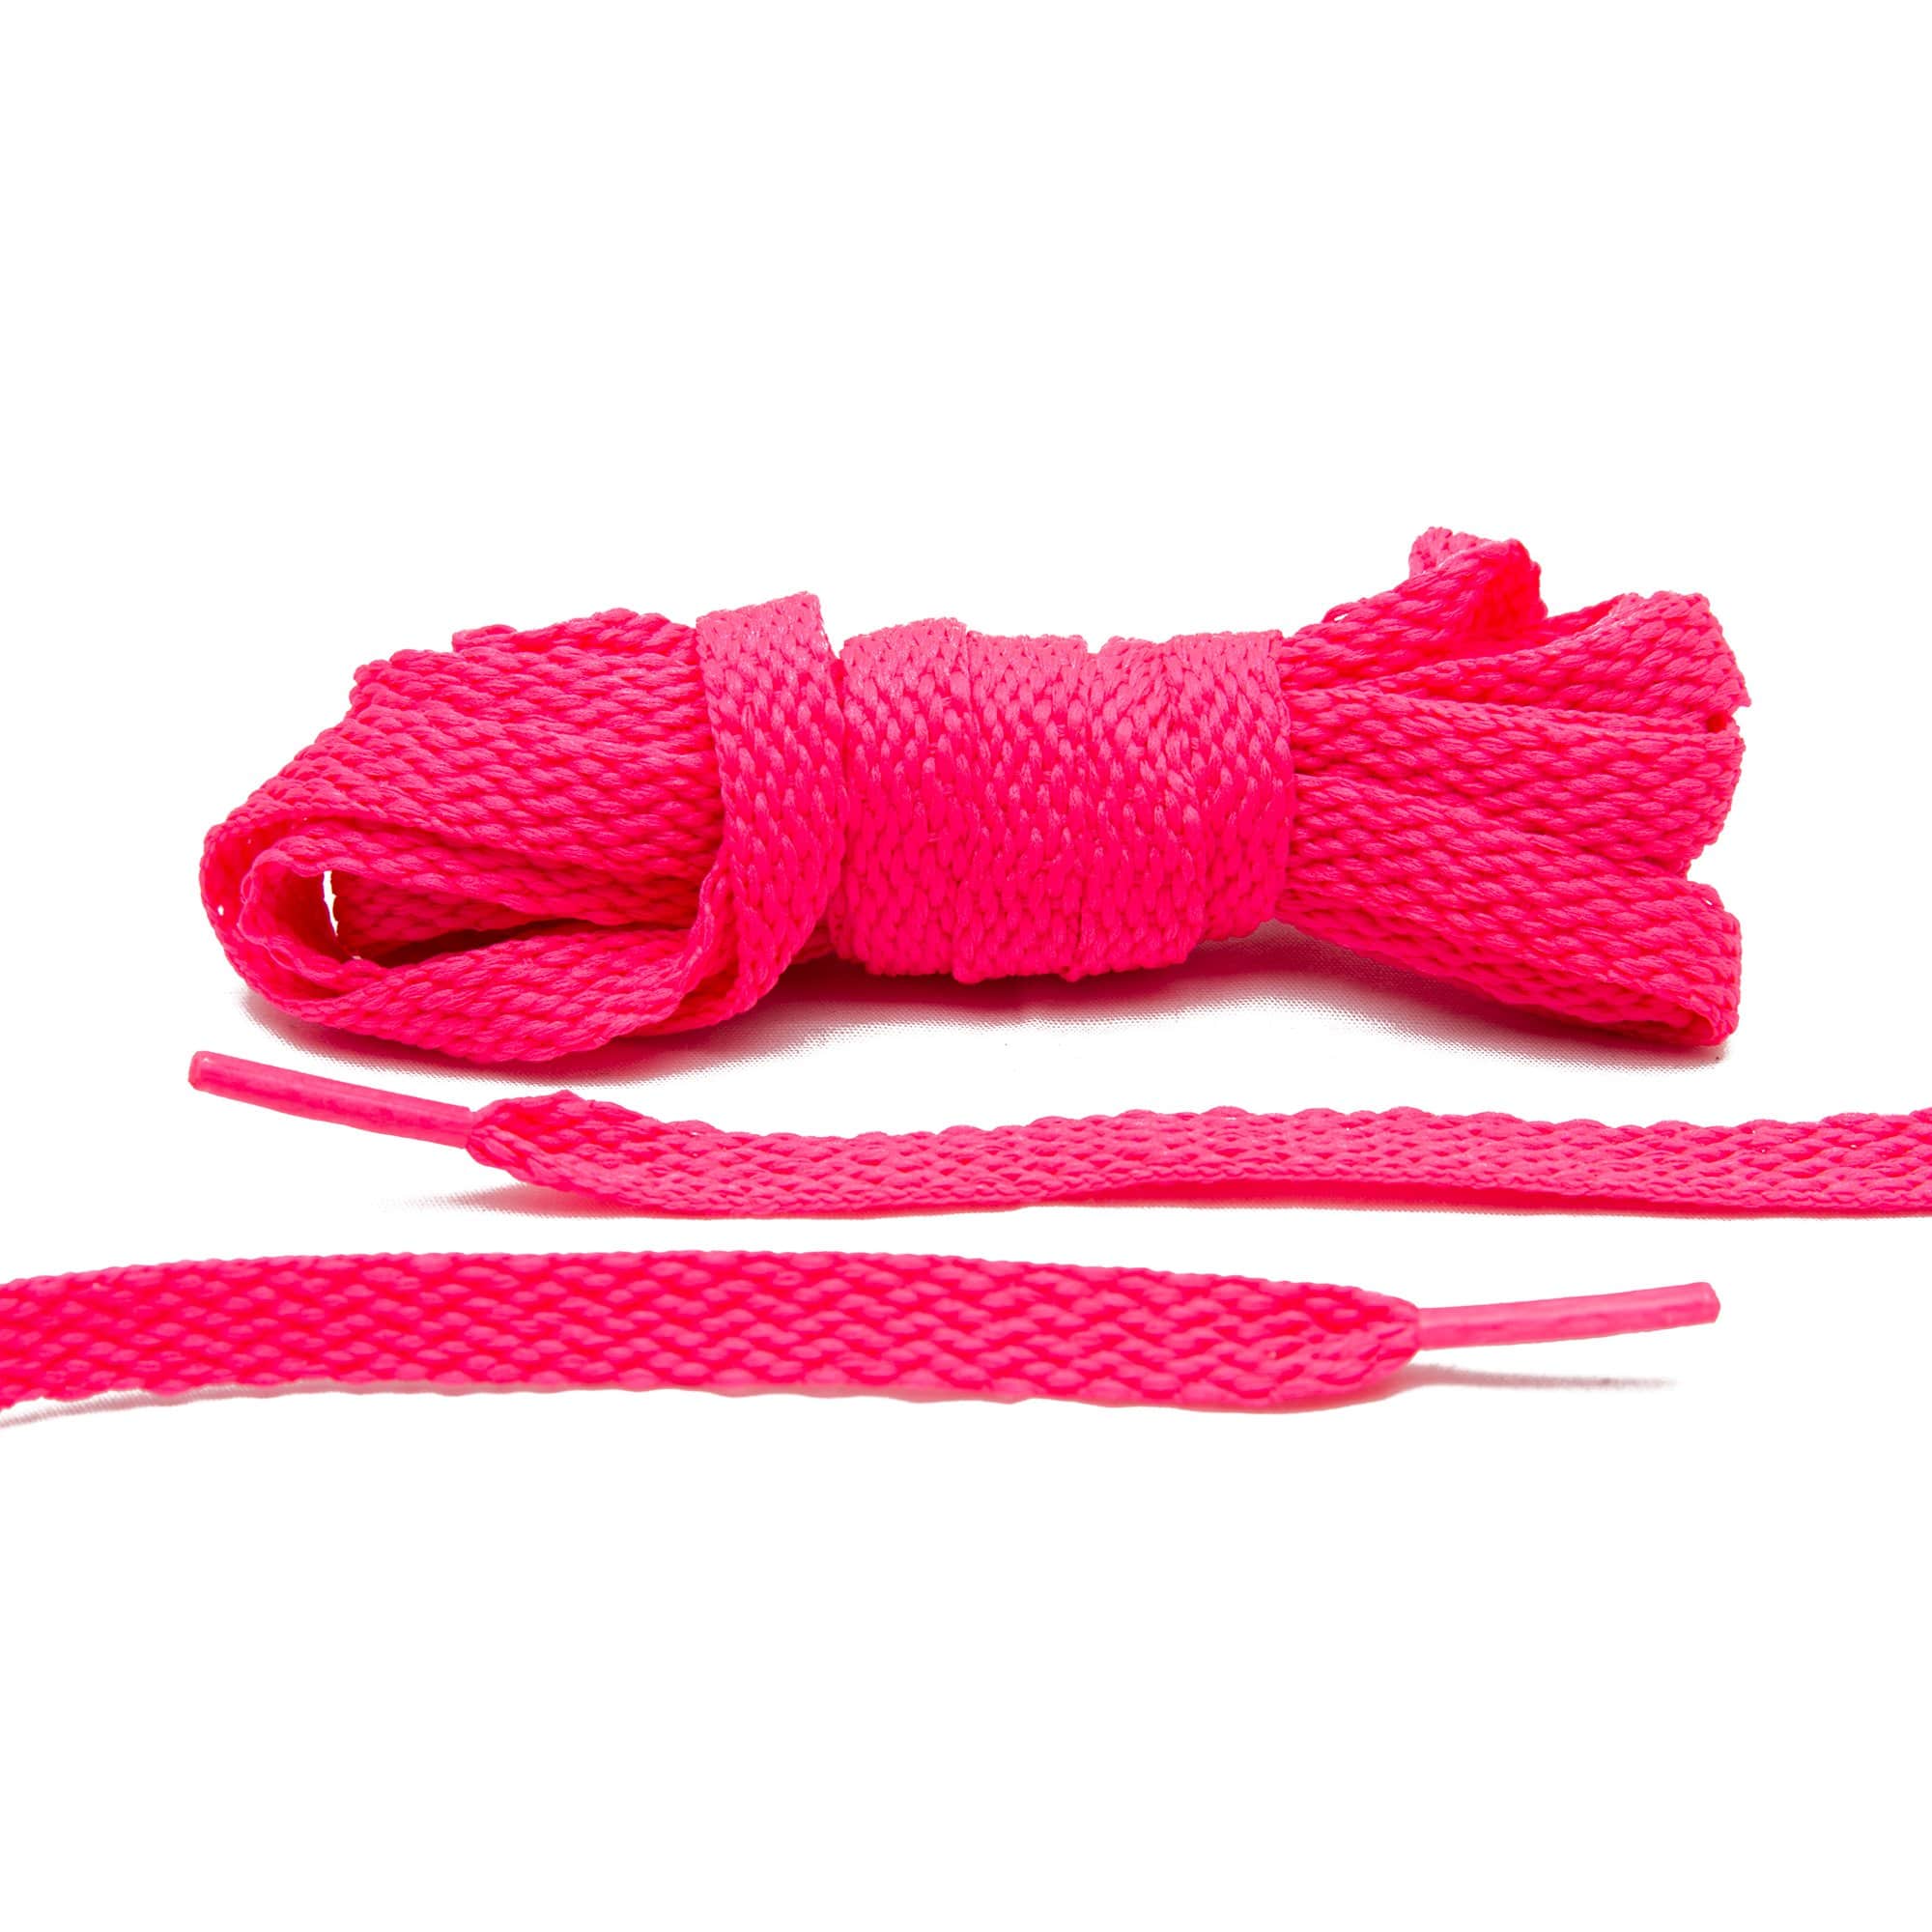 Hot Pink/Black Rope Laces